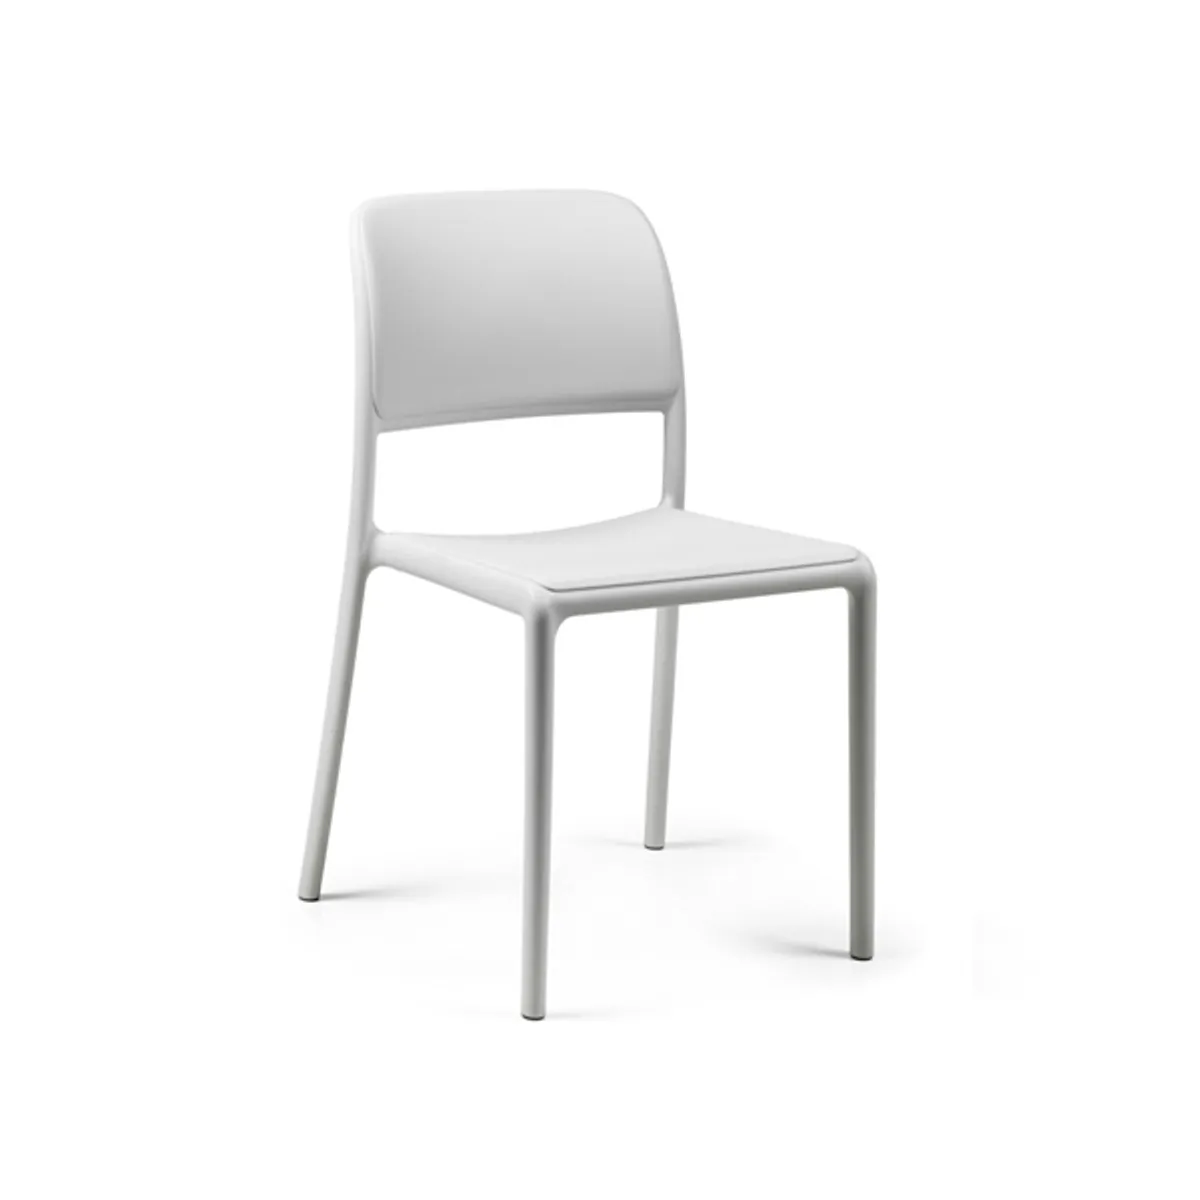 Riva bistrot side chair 2